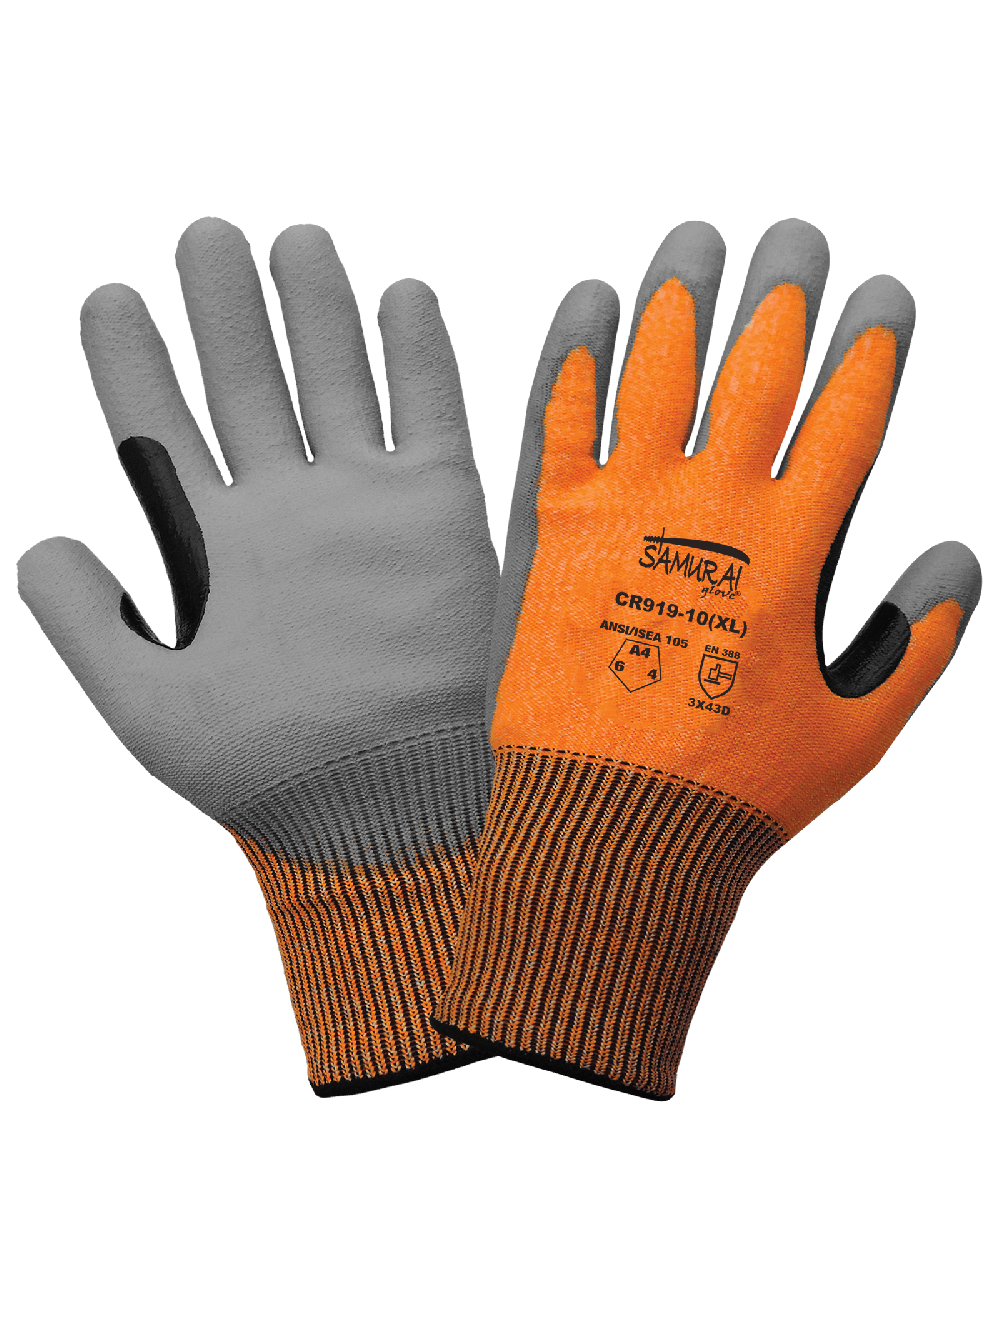 Samurai Glove® Cut, Abrasion, and Puncture Resistant Touch Screen Responsive Gloves - CR919